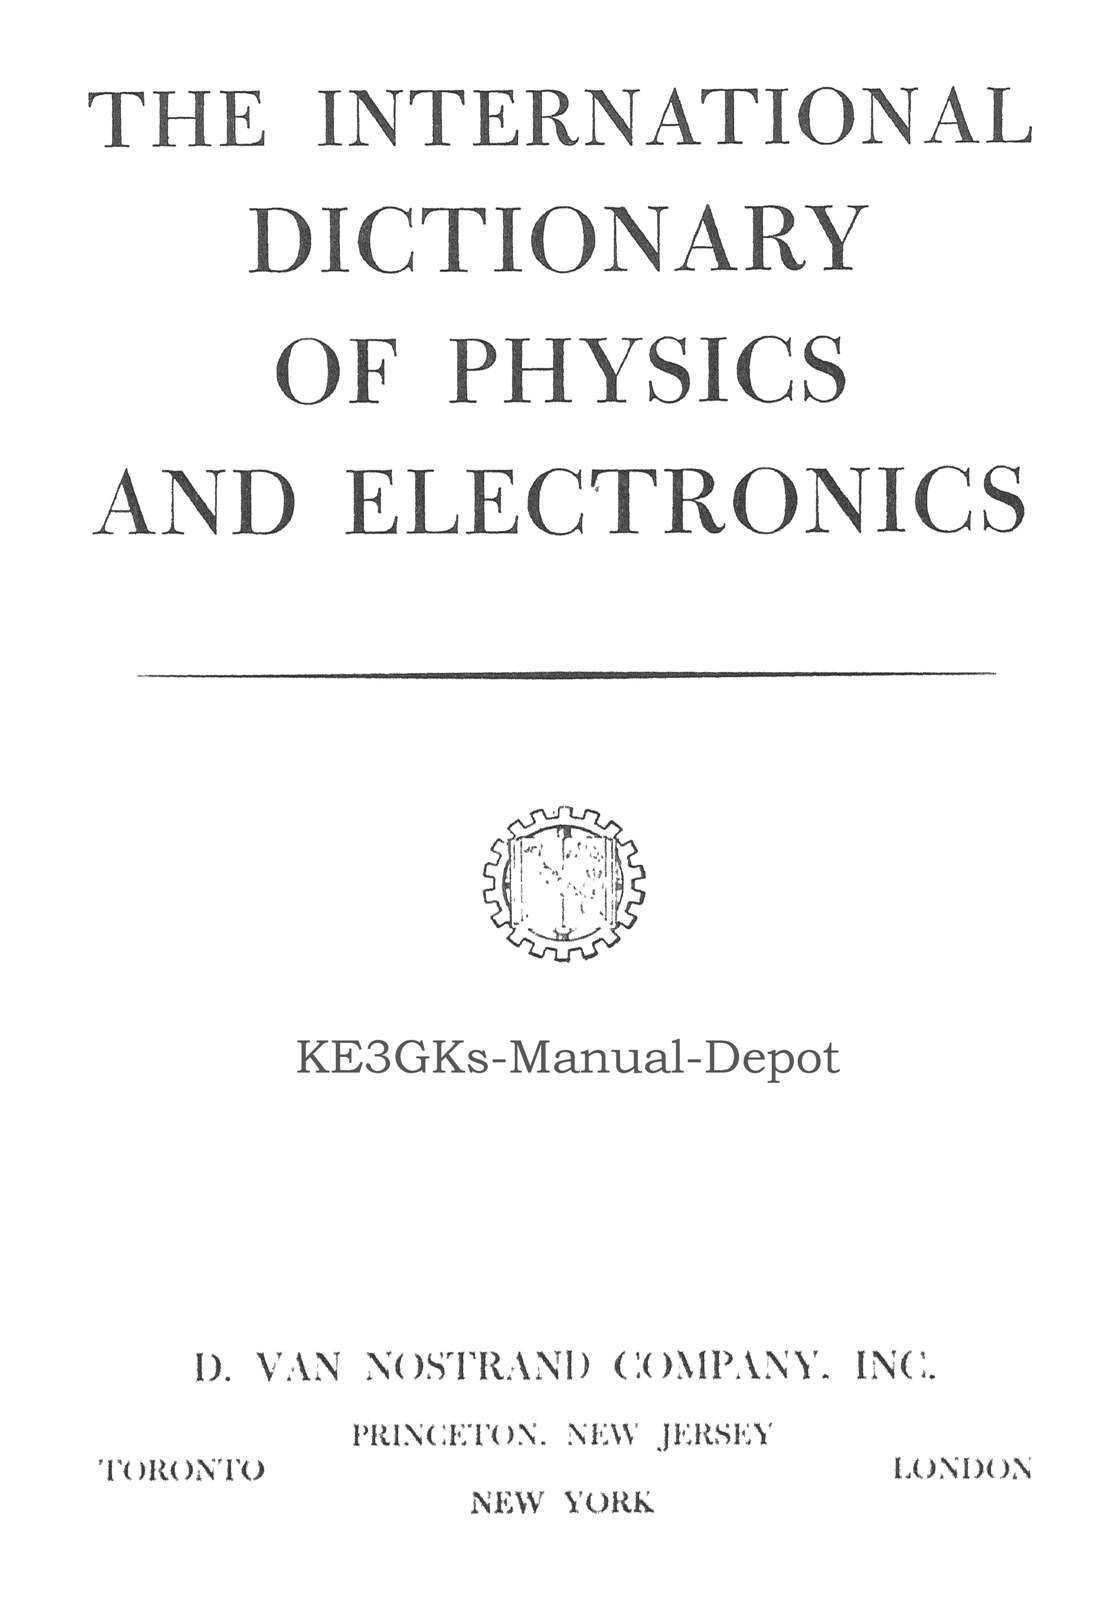 The International Dictionary of Physics and Electronics * CDROM